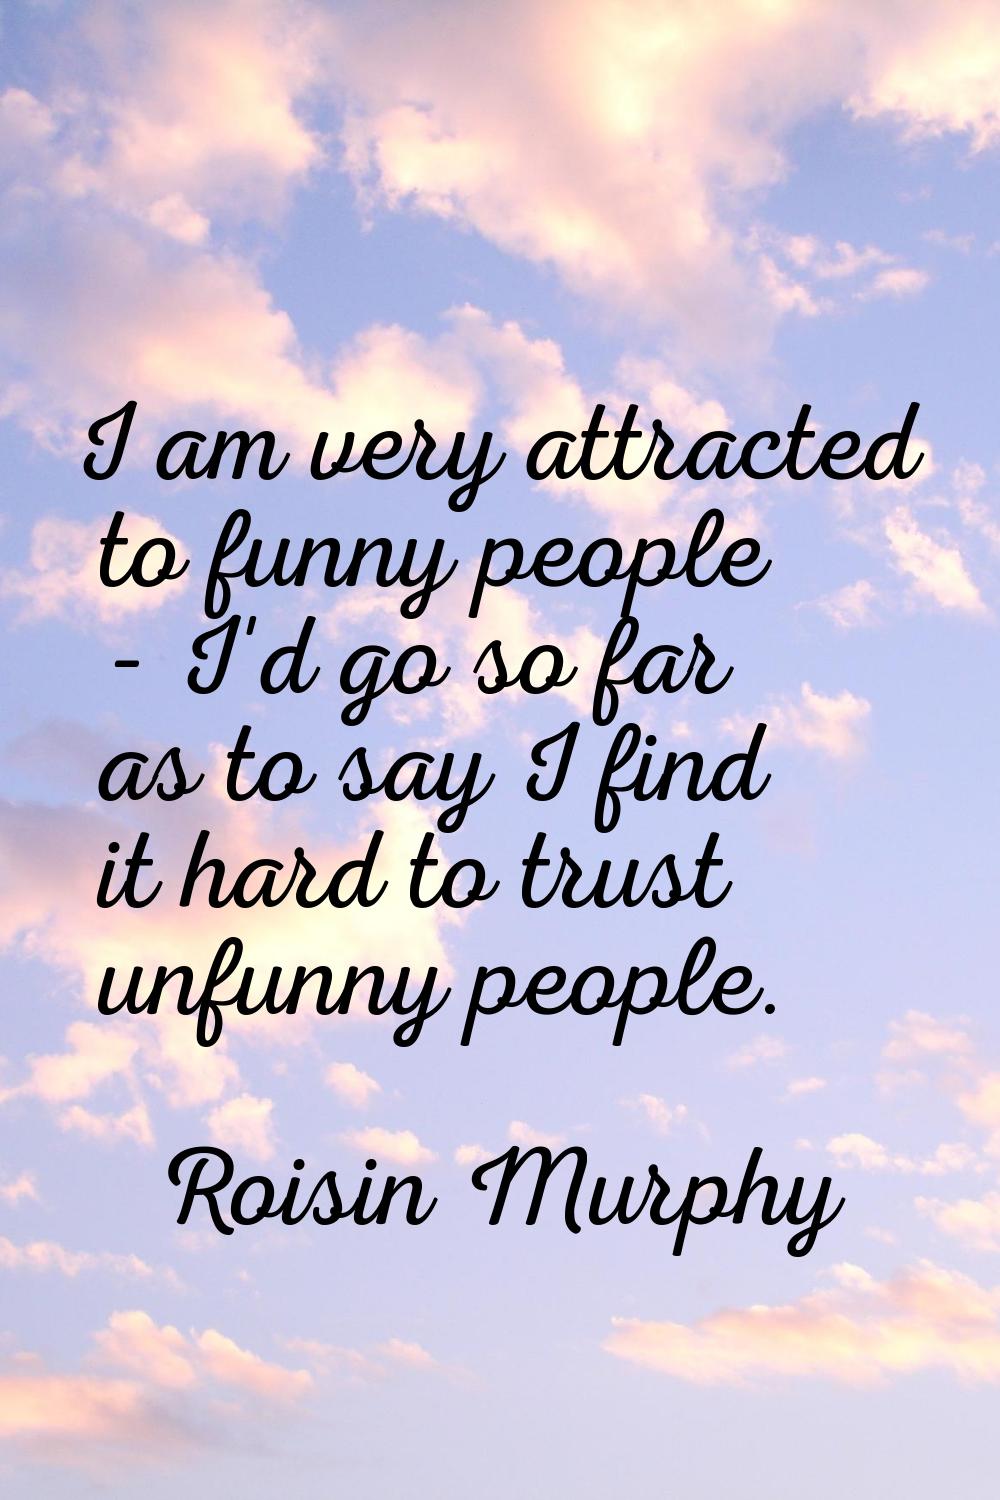 I am very attracted to funny people - I'd go so far as to say I find it hard to trust unfunny peopl